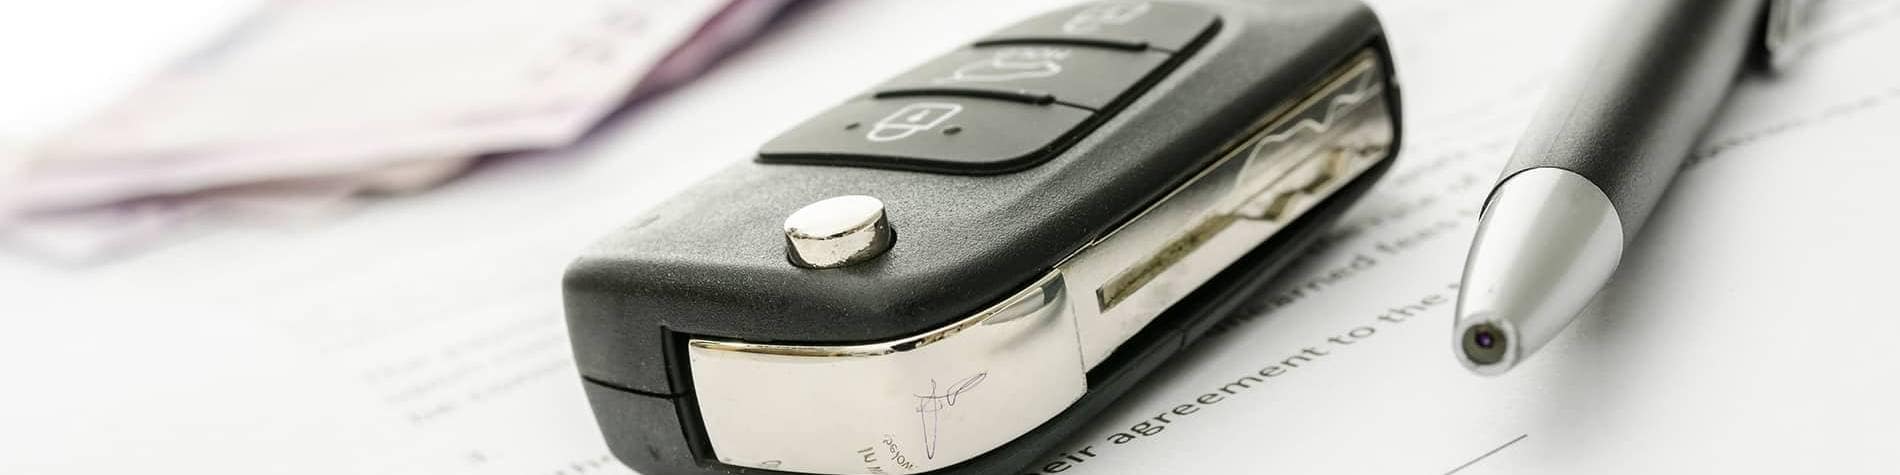 Vehicle keys on top of a financing agreement